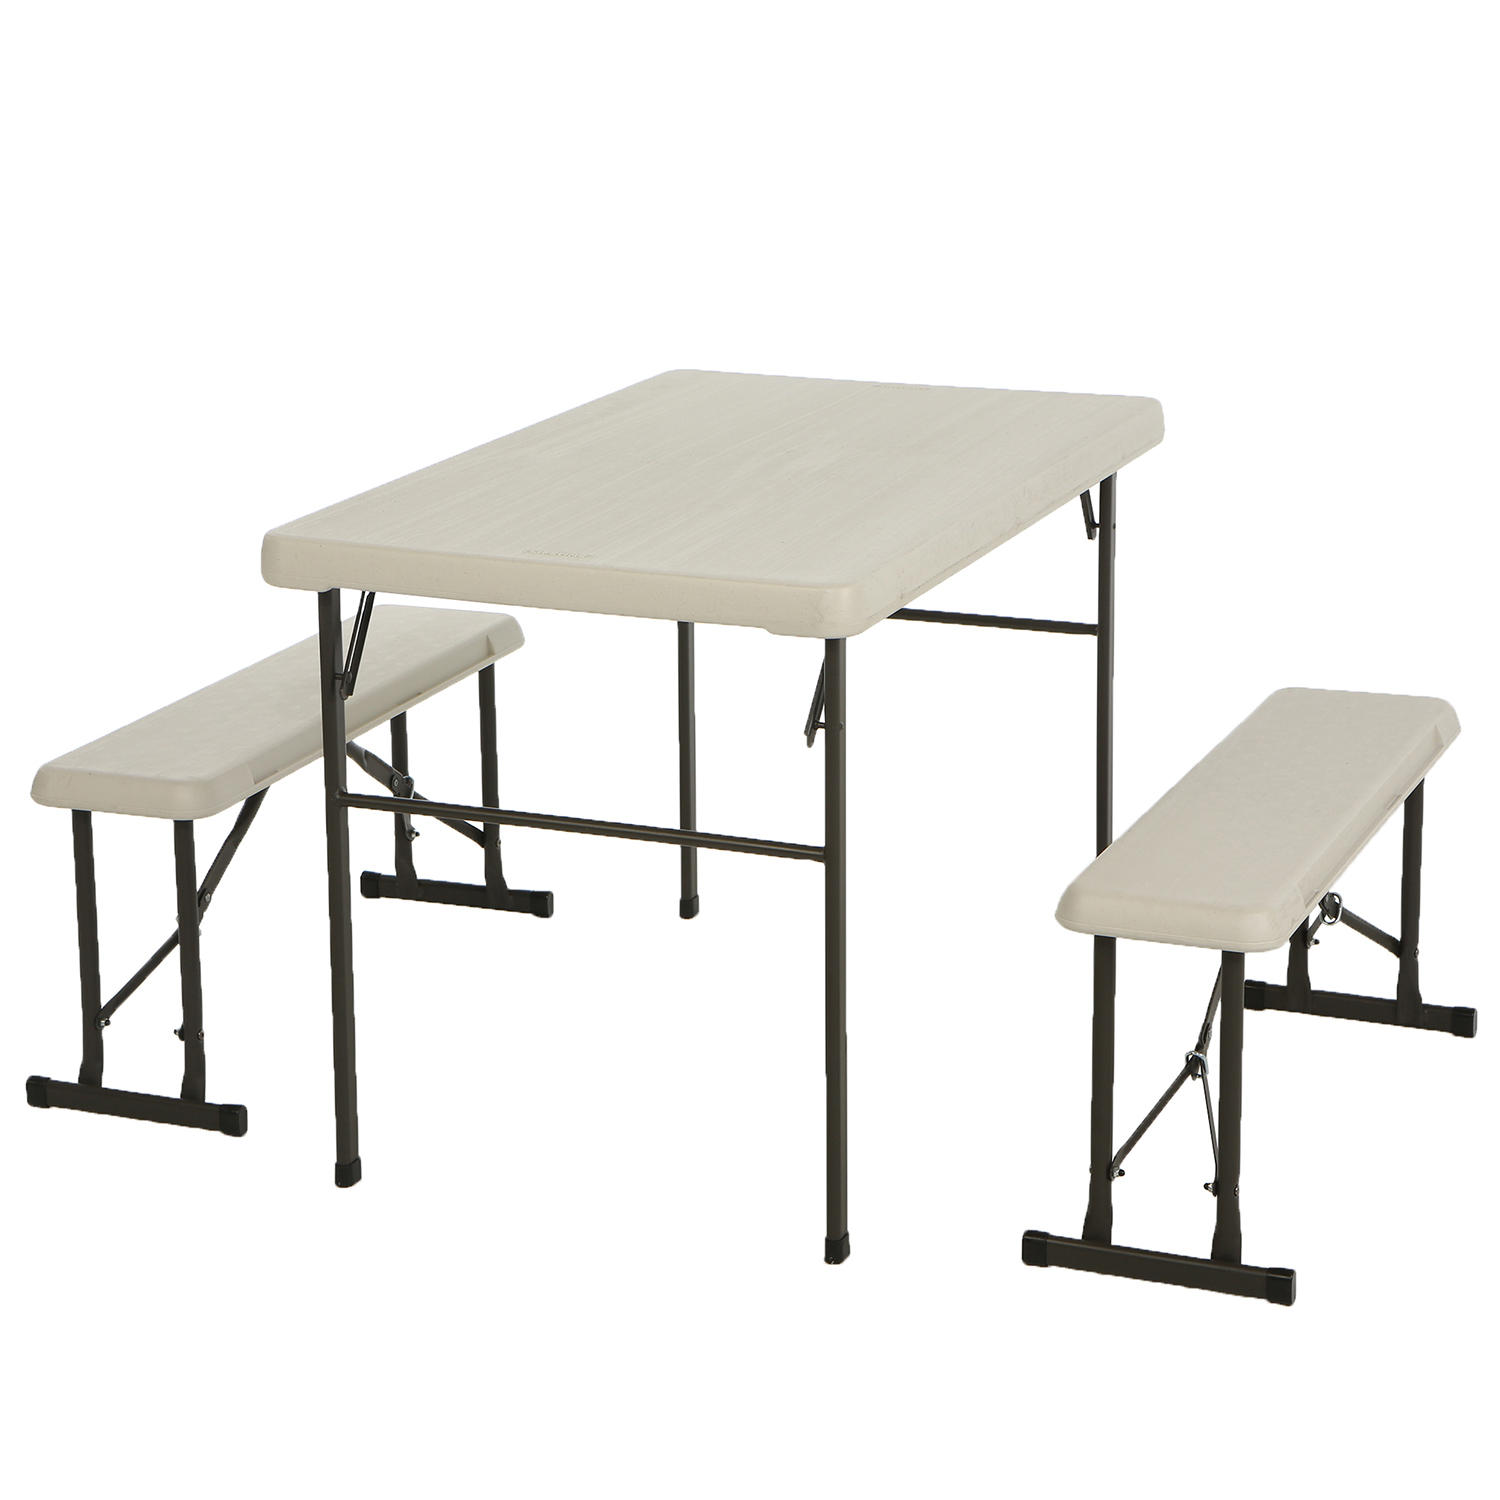 Lifetime Folding Picnic Table with Benches